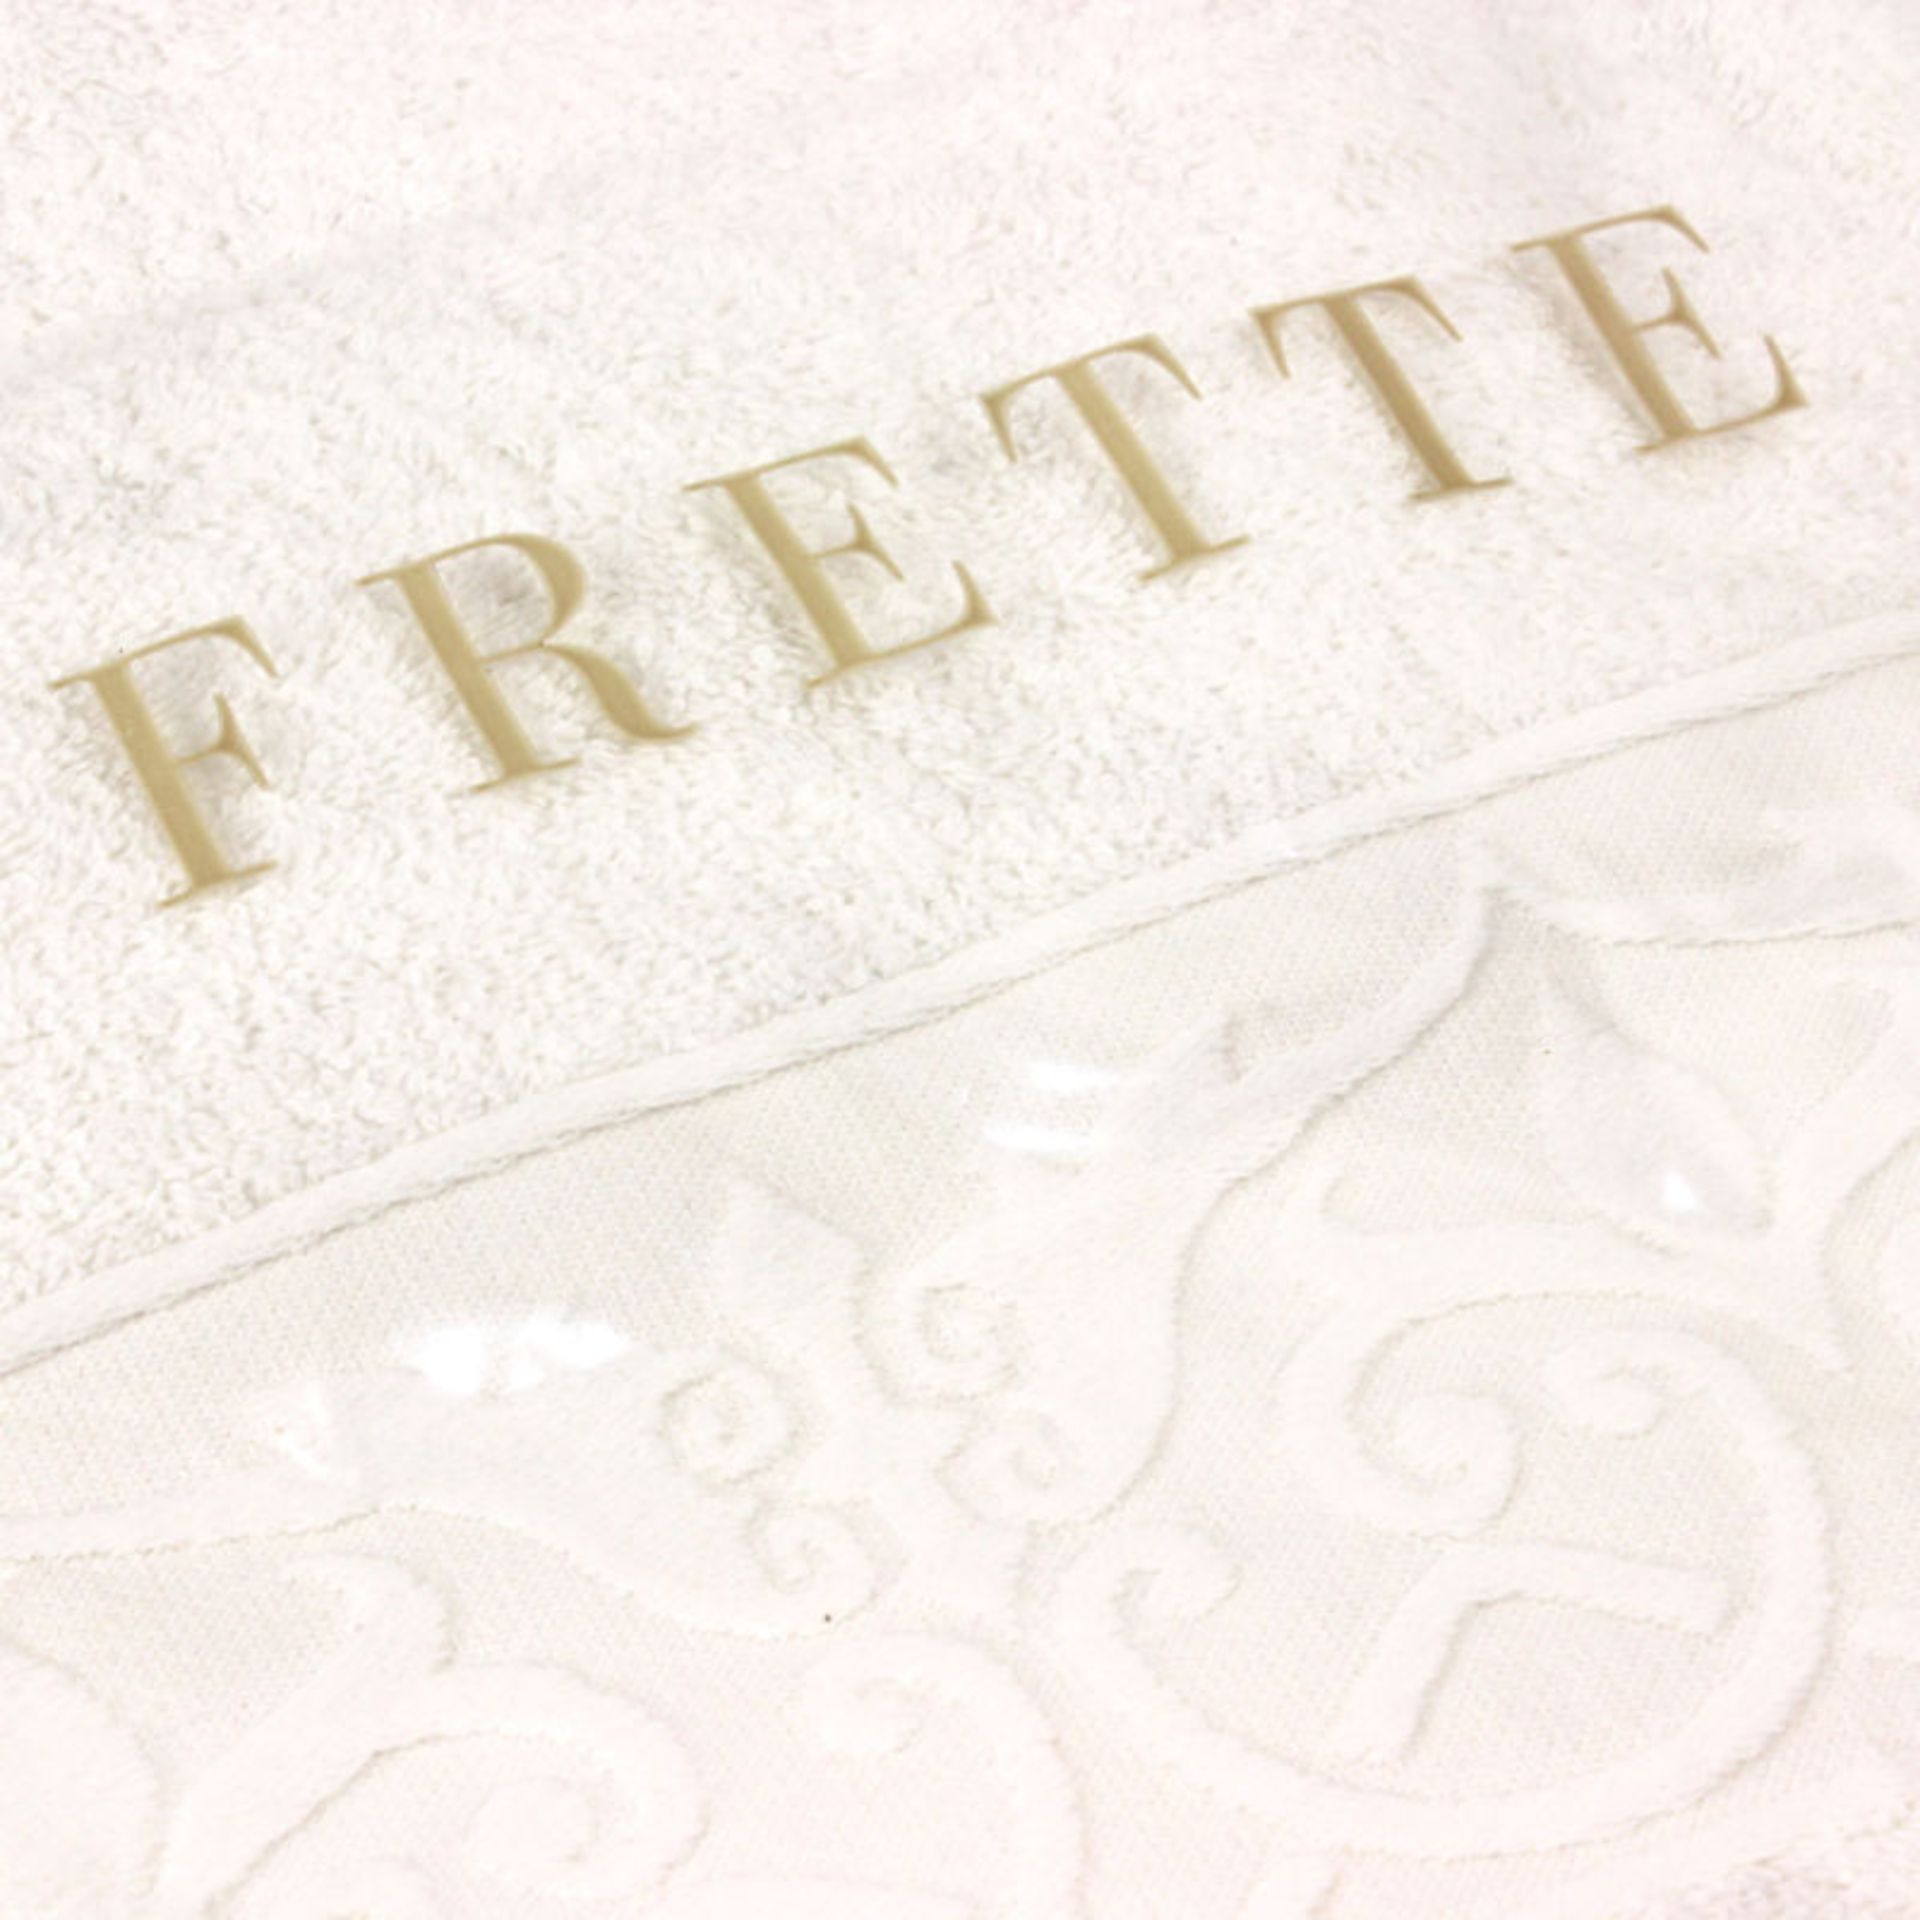 V *TRADE QTY* Brand New Frette Italian White Bath Towel With Embossed Pattern X 80 YOUR BID PRICE TO - Image 2 of 2